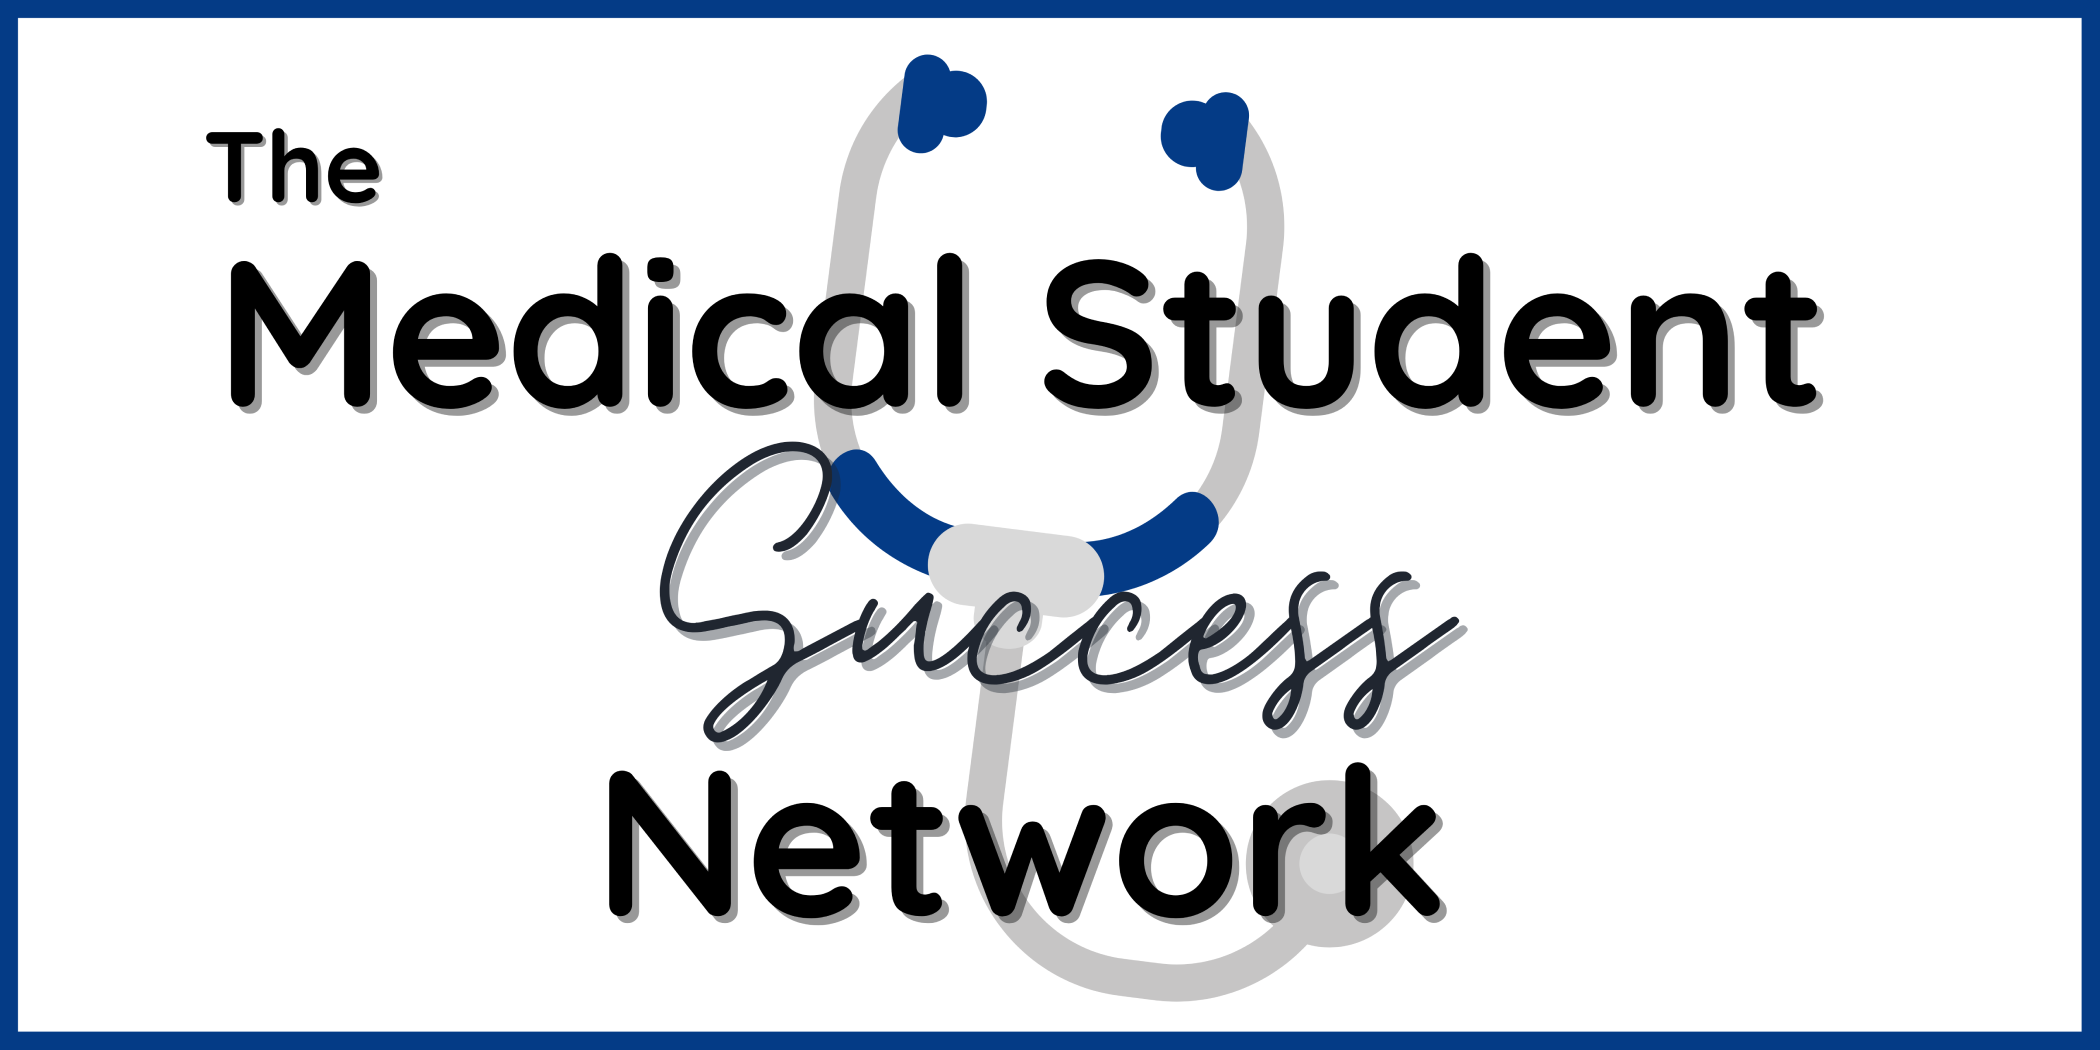 The Medical Student Success Network